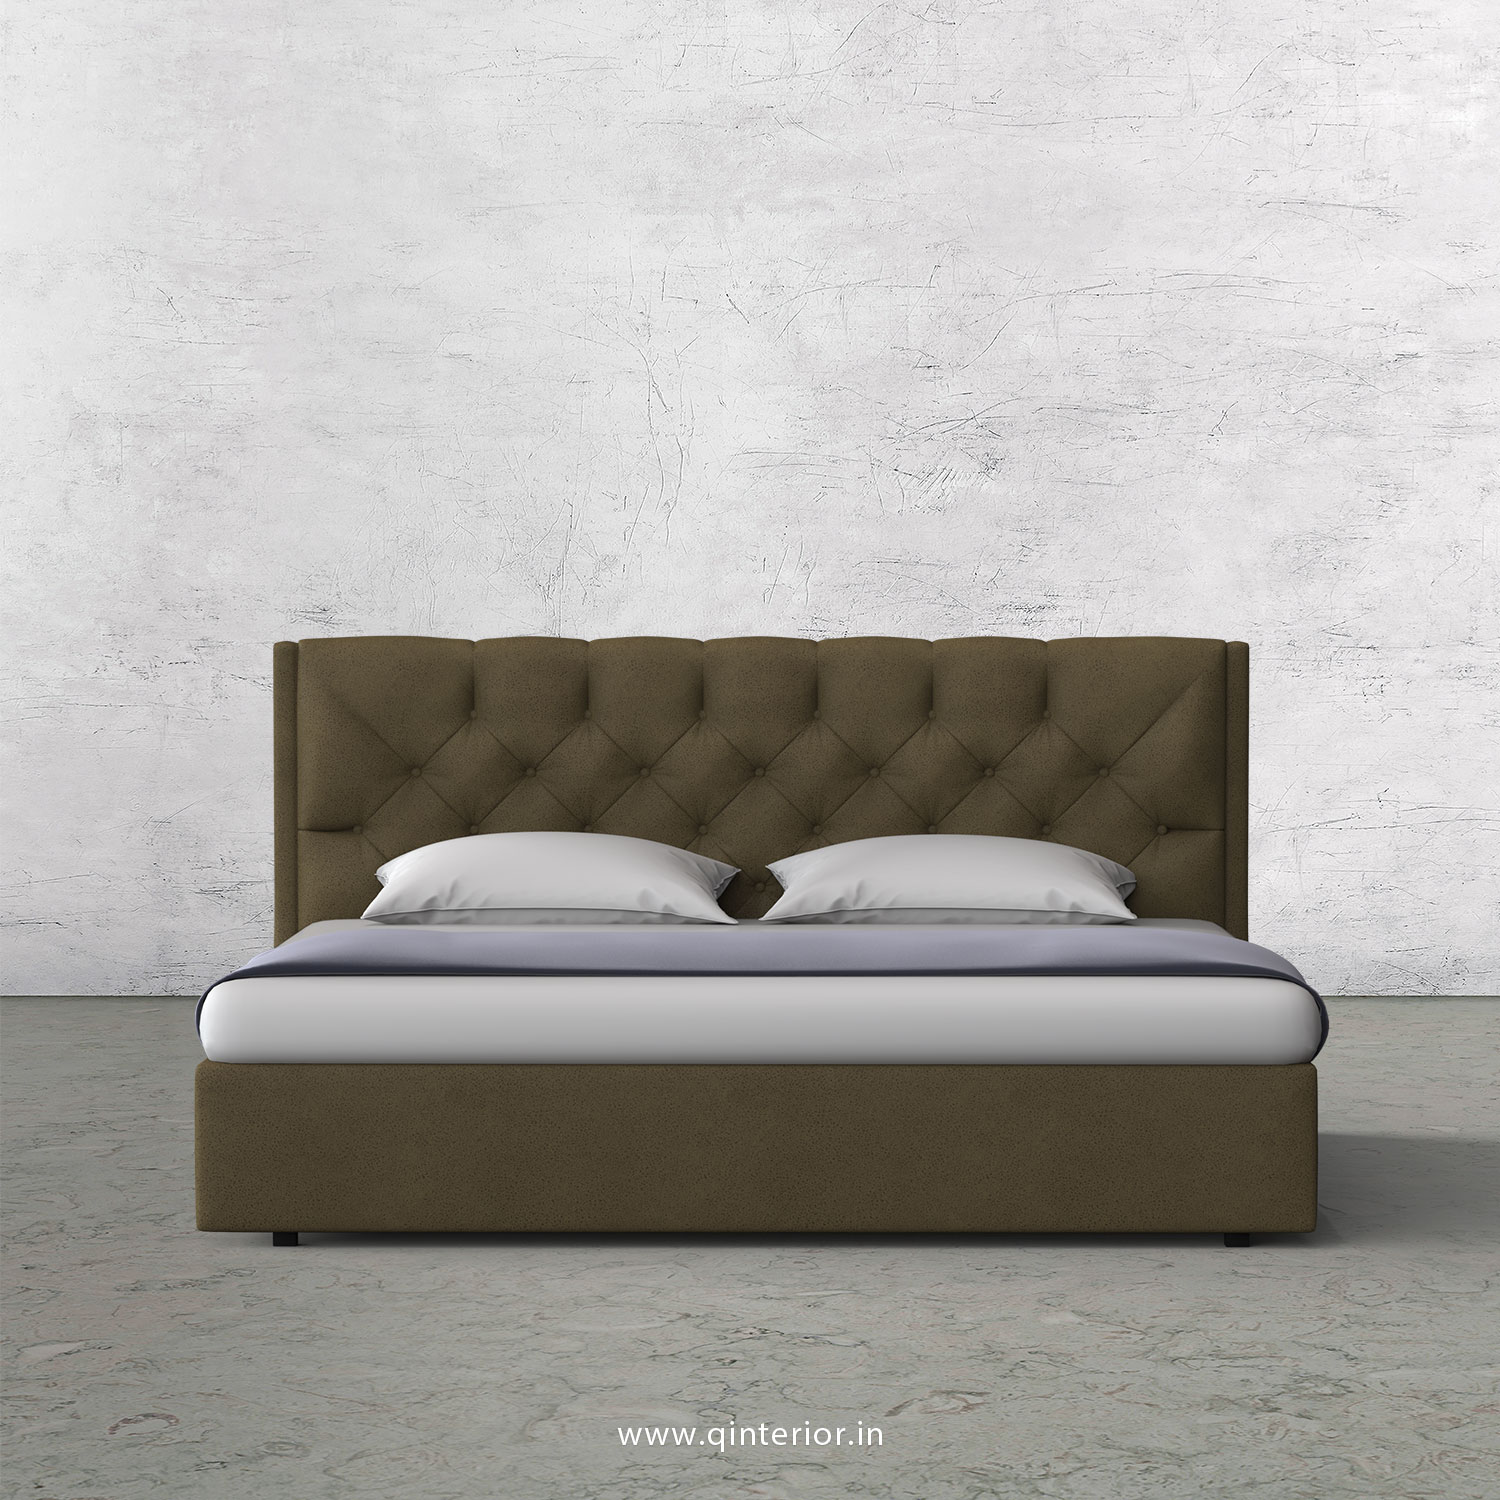 Scorpius Queen Bed in Fab Leather Fabric - QBD009 FL01